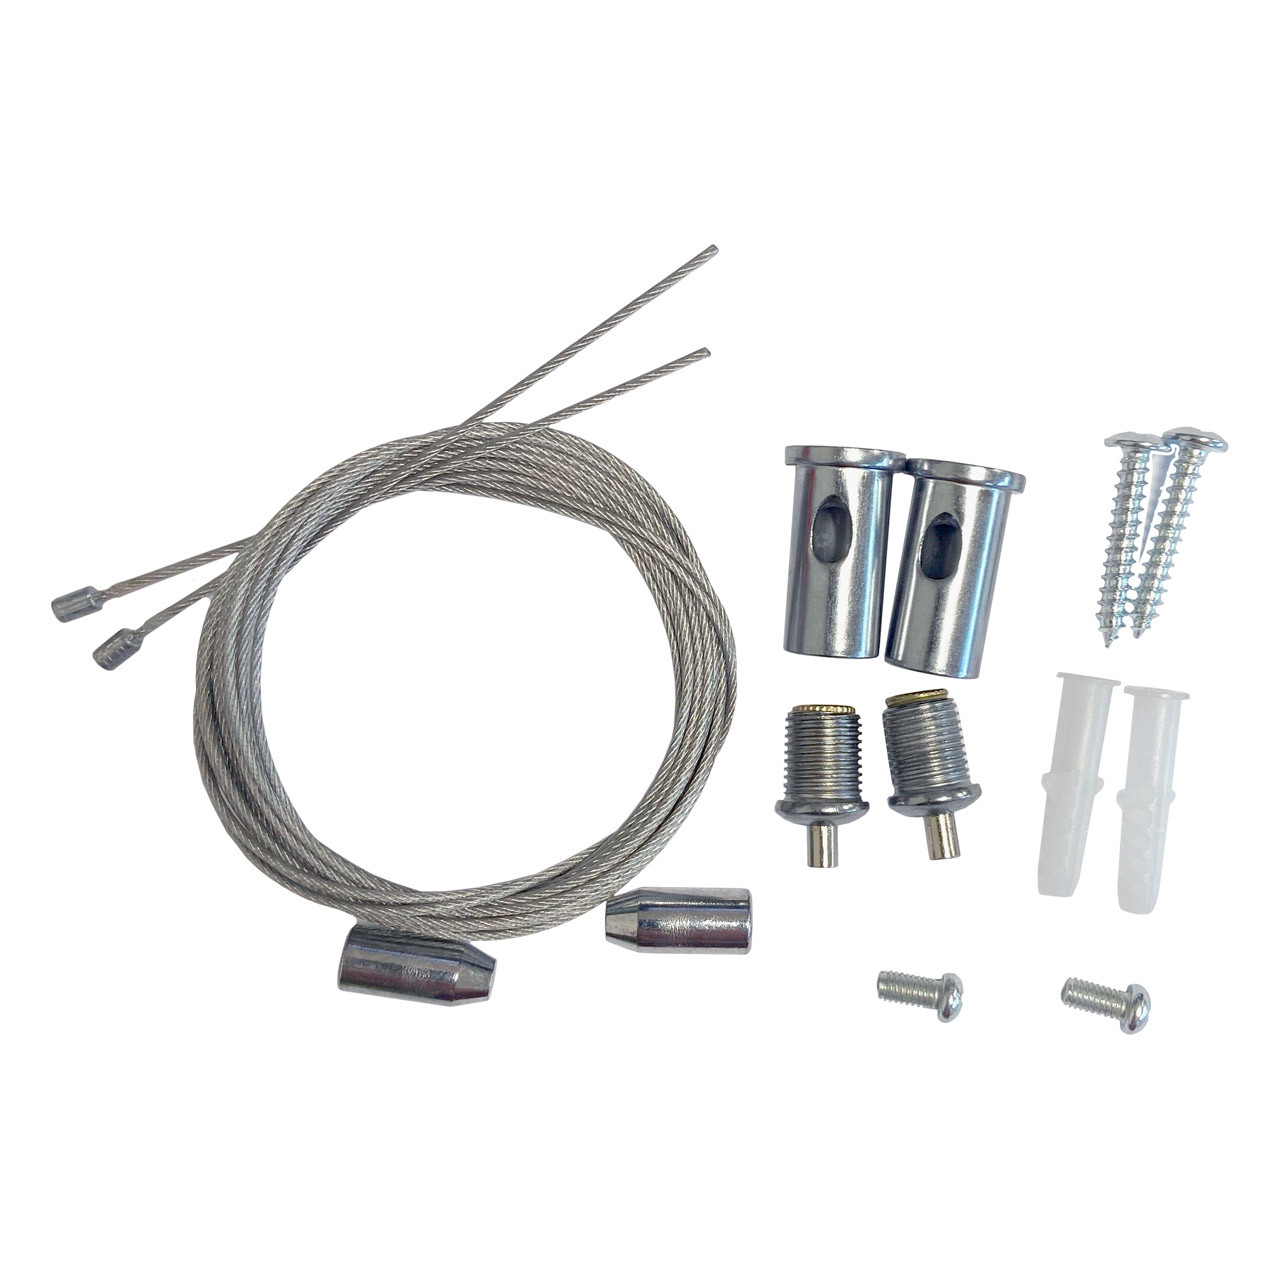 Photos - Floodlight / Street Light Phoebe Suspension Kit 1.5m Krios for use with Emergency Exit Blade 14565 